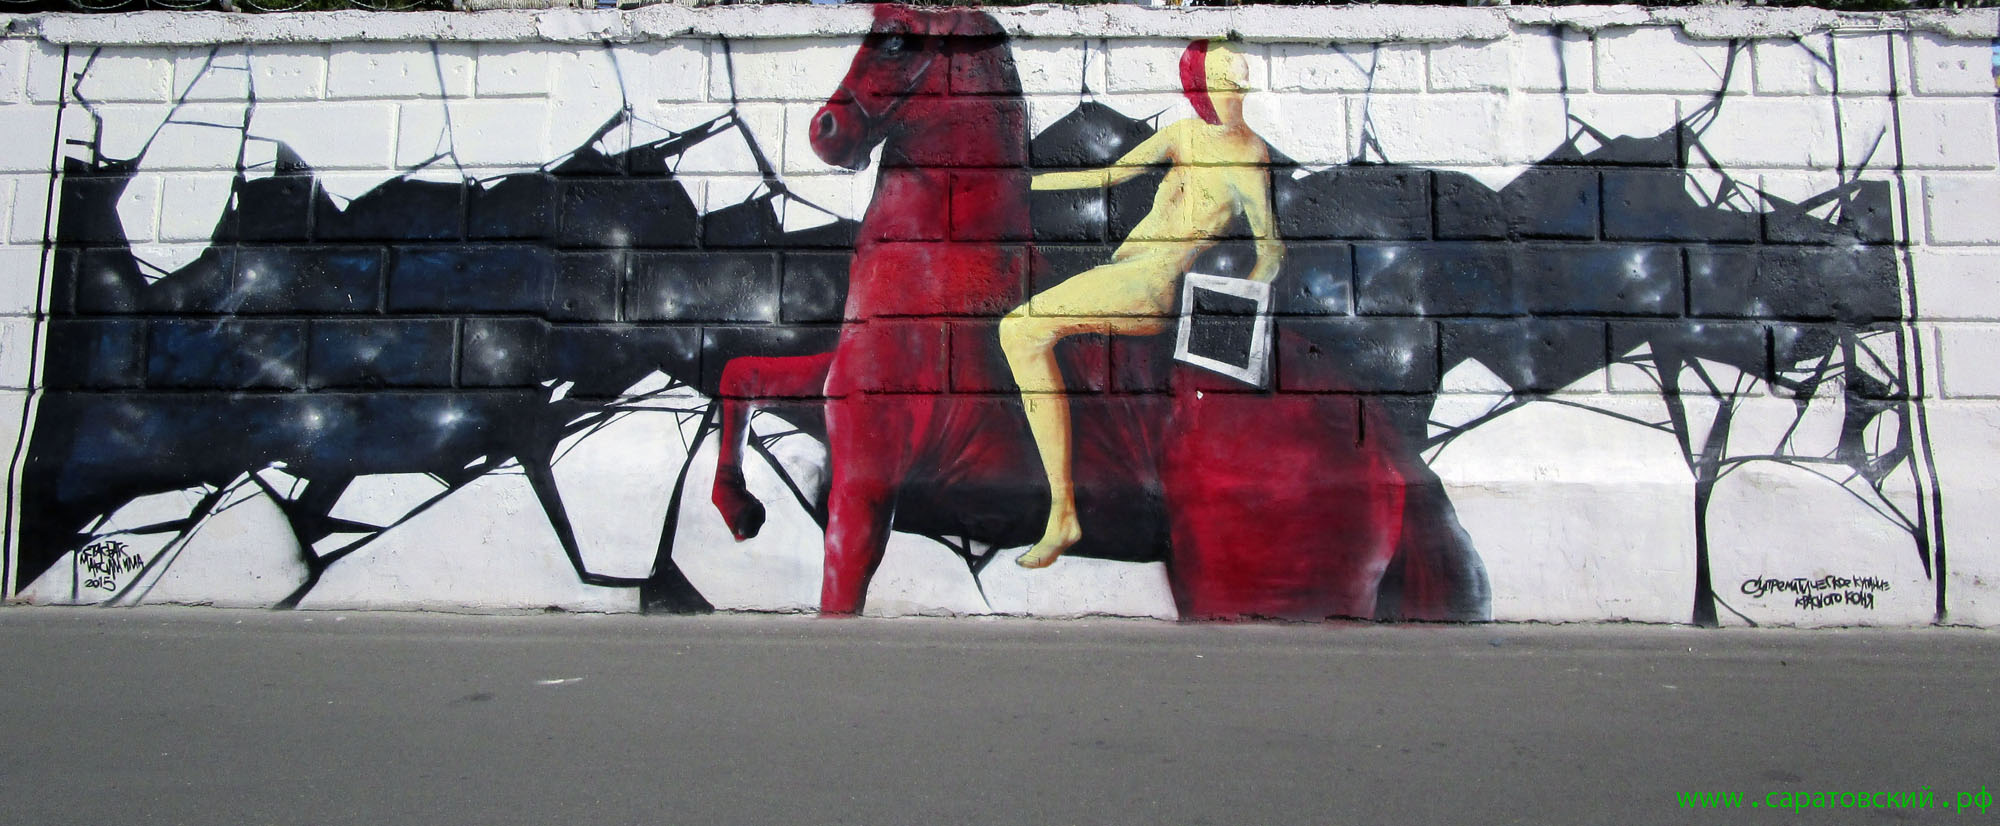 Saratov waterfront graffiti: 'Bathing of a Red Horse' painting by Kuzma Petrov-Vodkin and Saratov, Russia